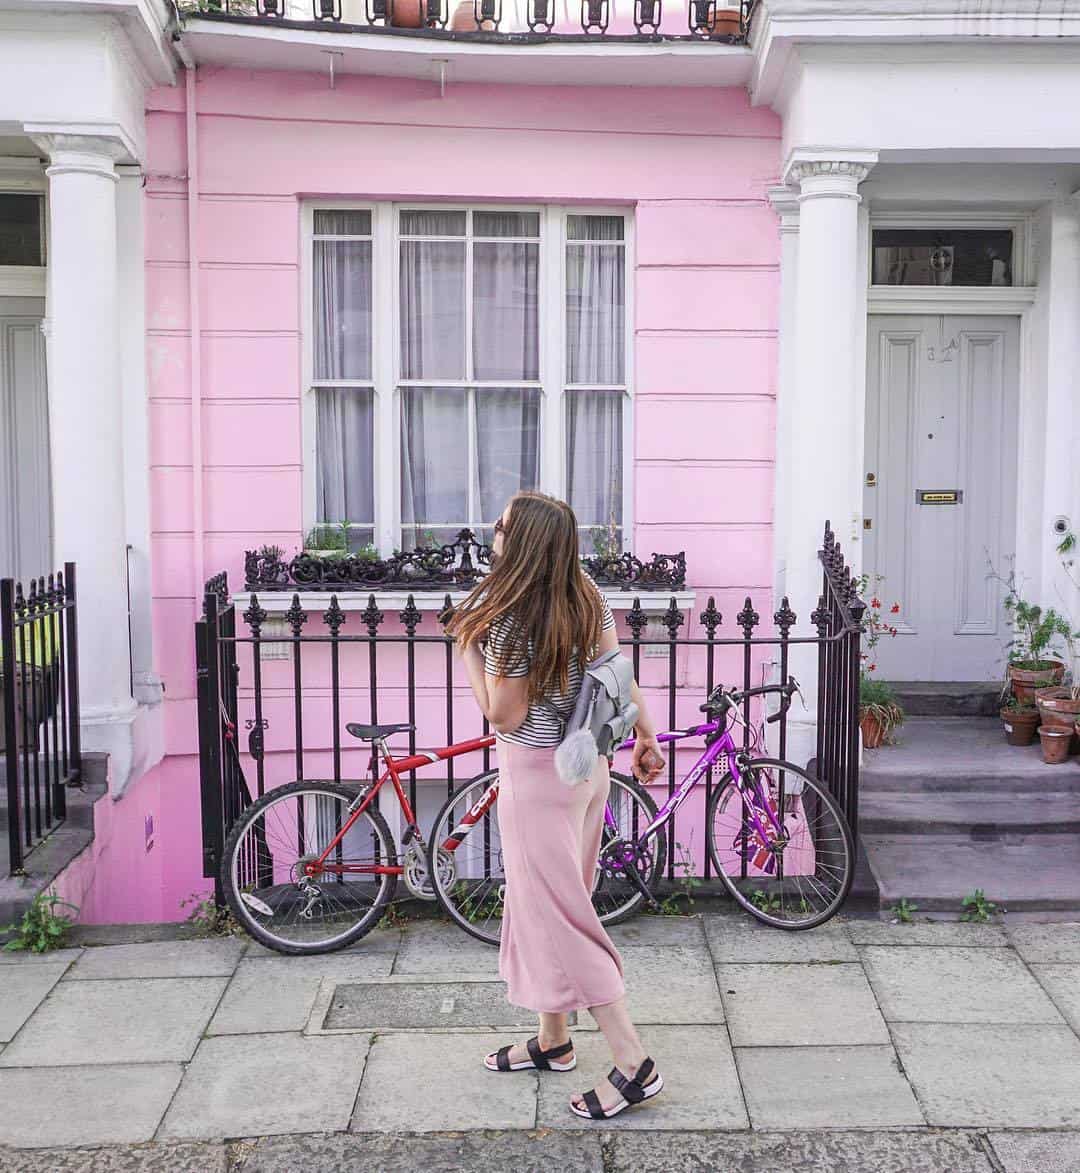 These lovely colorful houses in London!